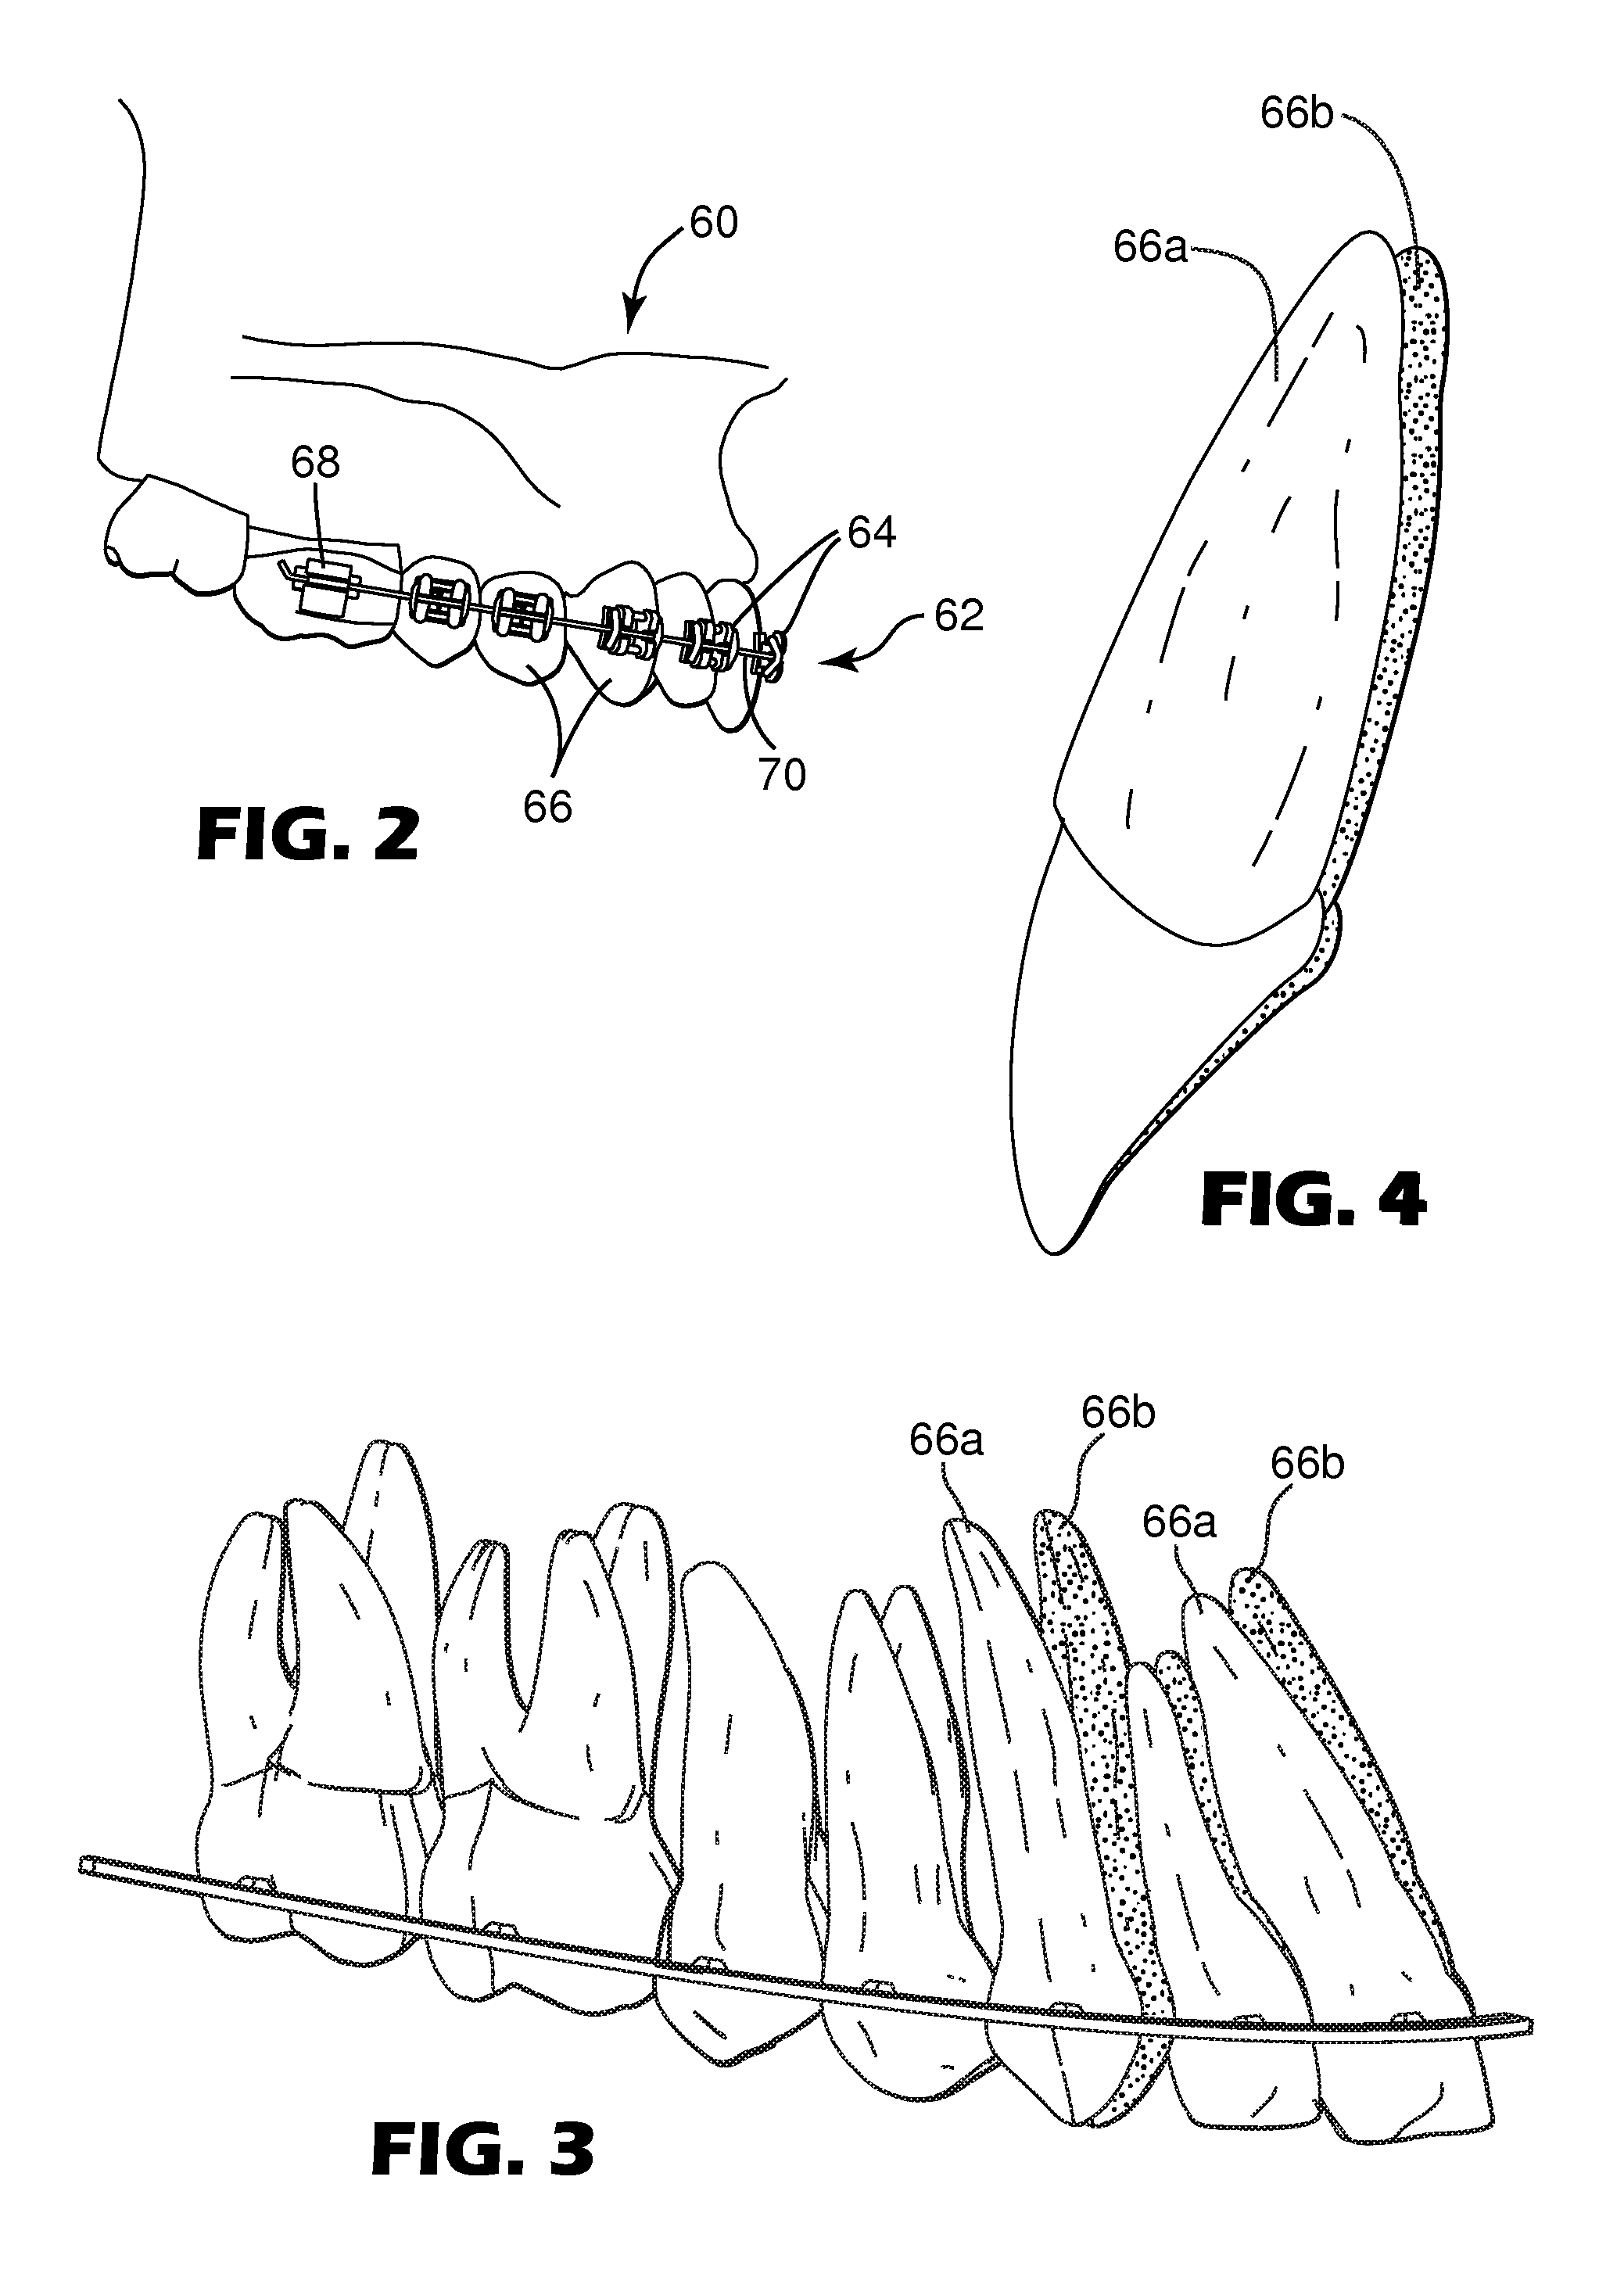 Method and apparatus for selecting a prescription for an orthodontic brace